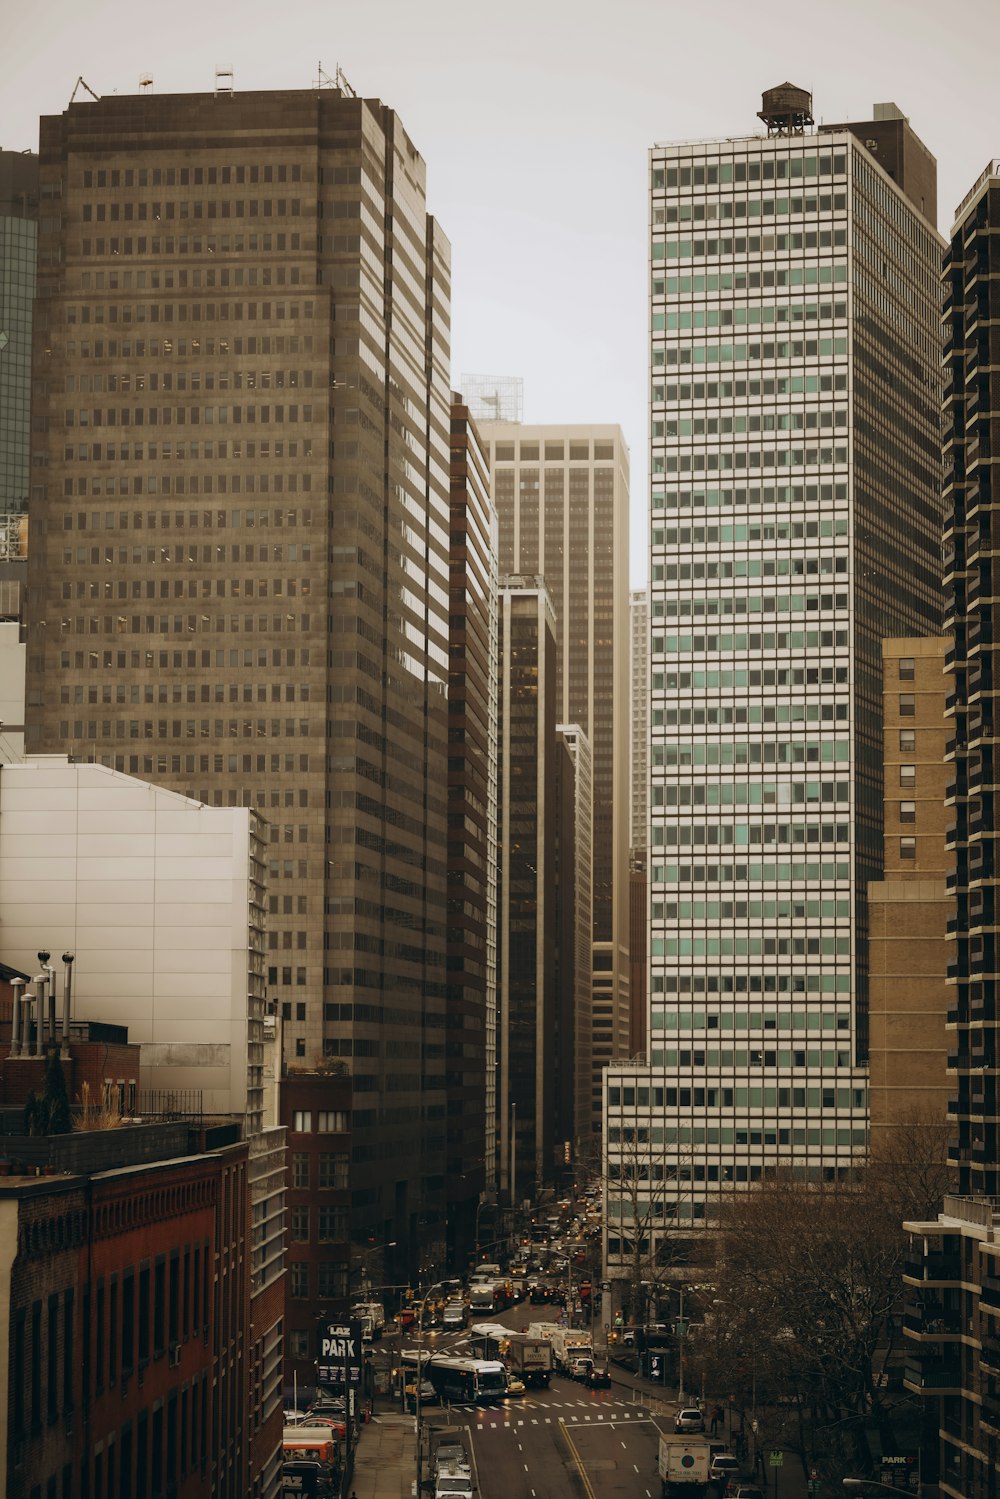 a view of a city street with tall buildings